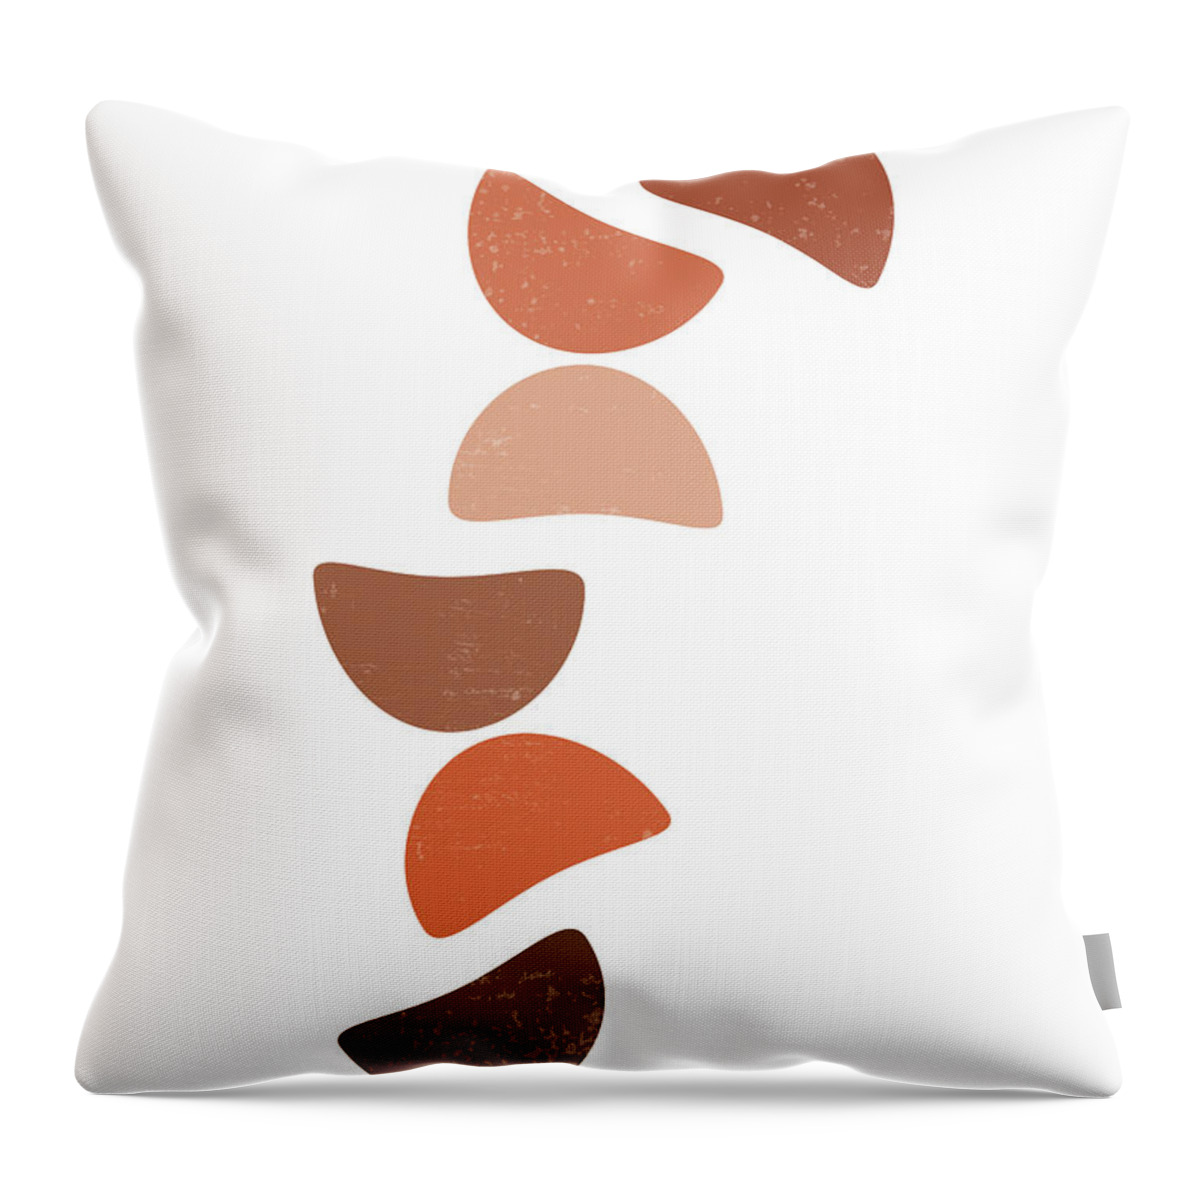 Terracotta Throw Pillow featuring the mixed media Terracotta Abstract 42 - Modern, Contemporary Art - Abstract Organic Shapes - Half Circles - Brown by Studio Grafiikka